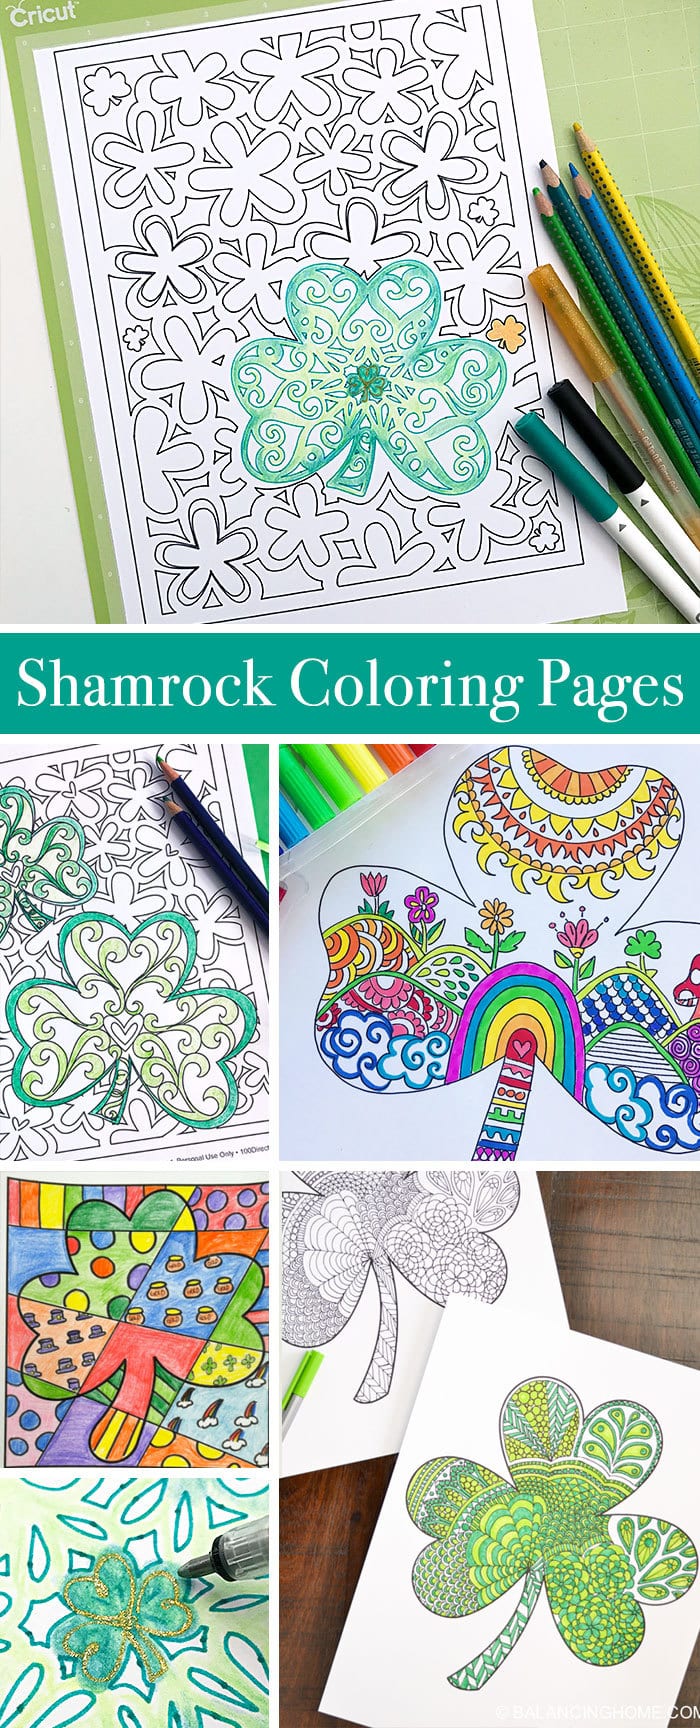 Shamrock Coloring Pages to Print and Color